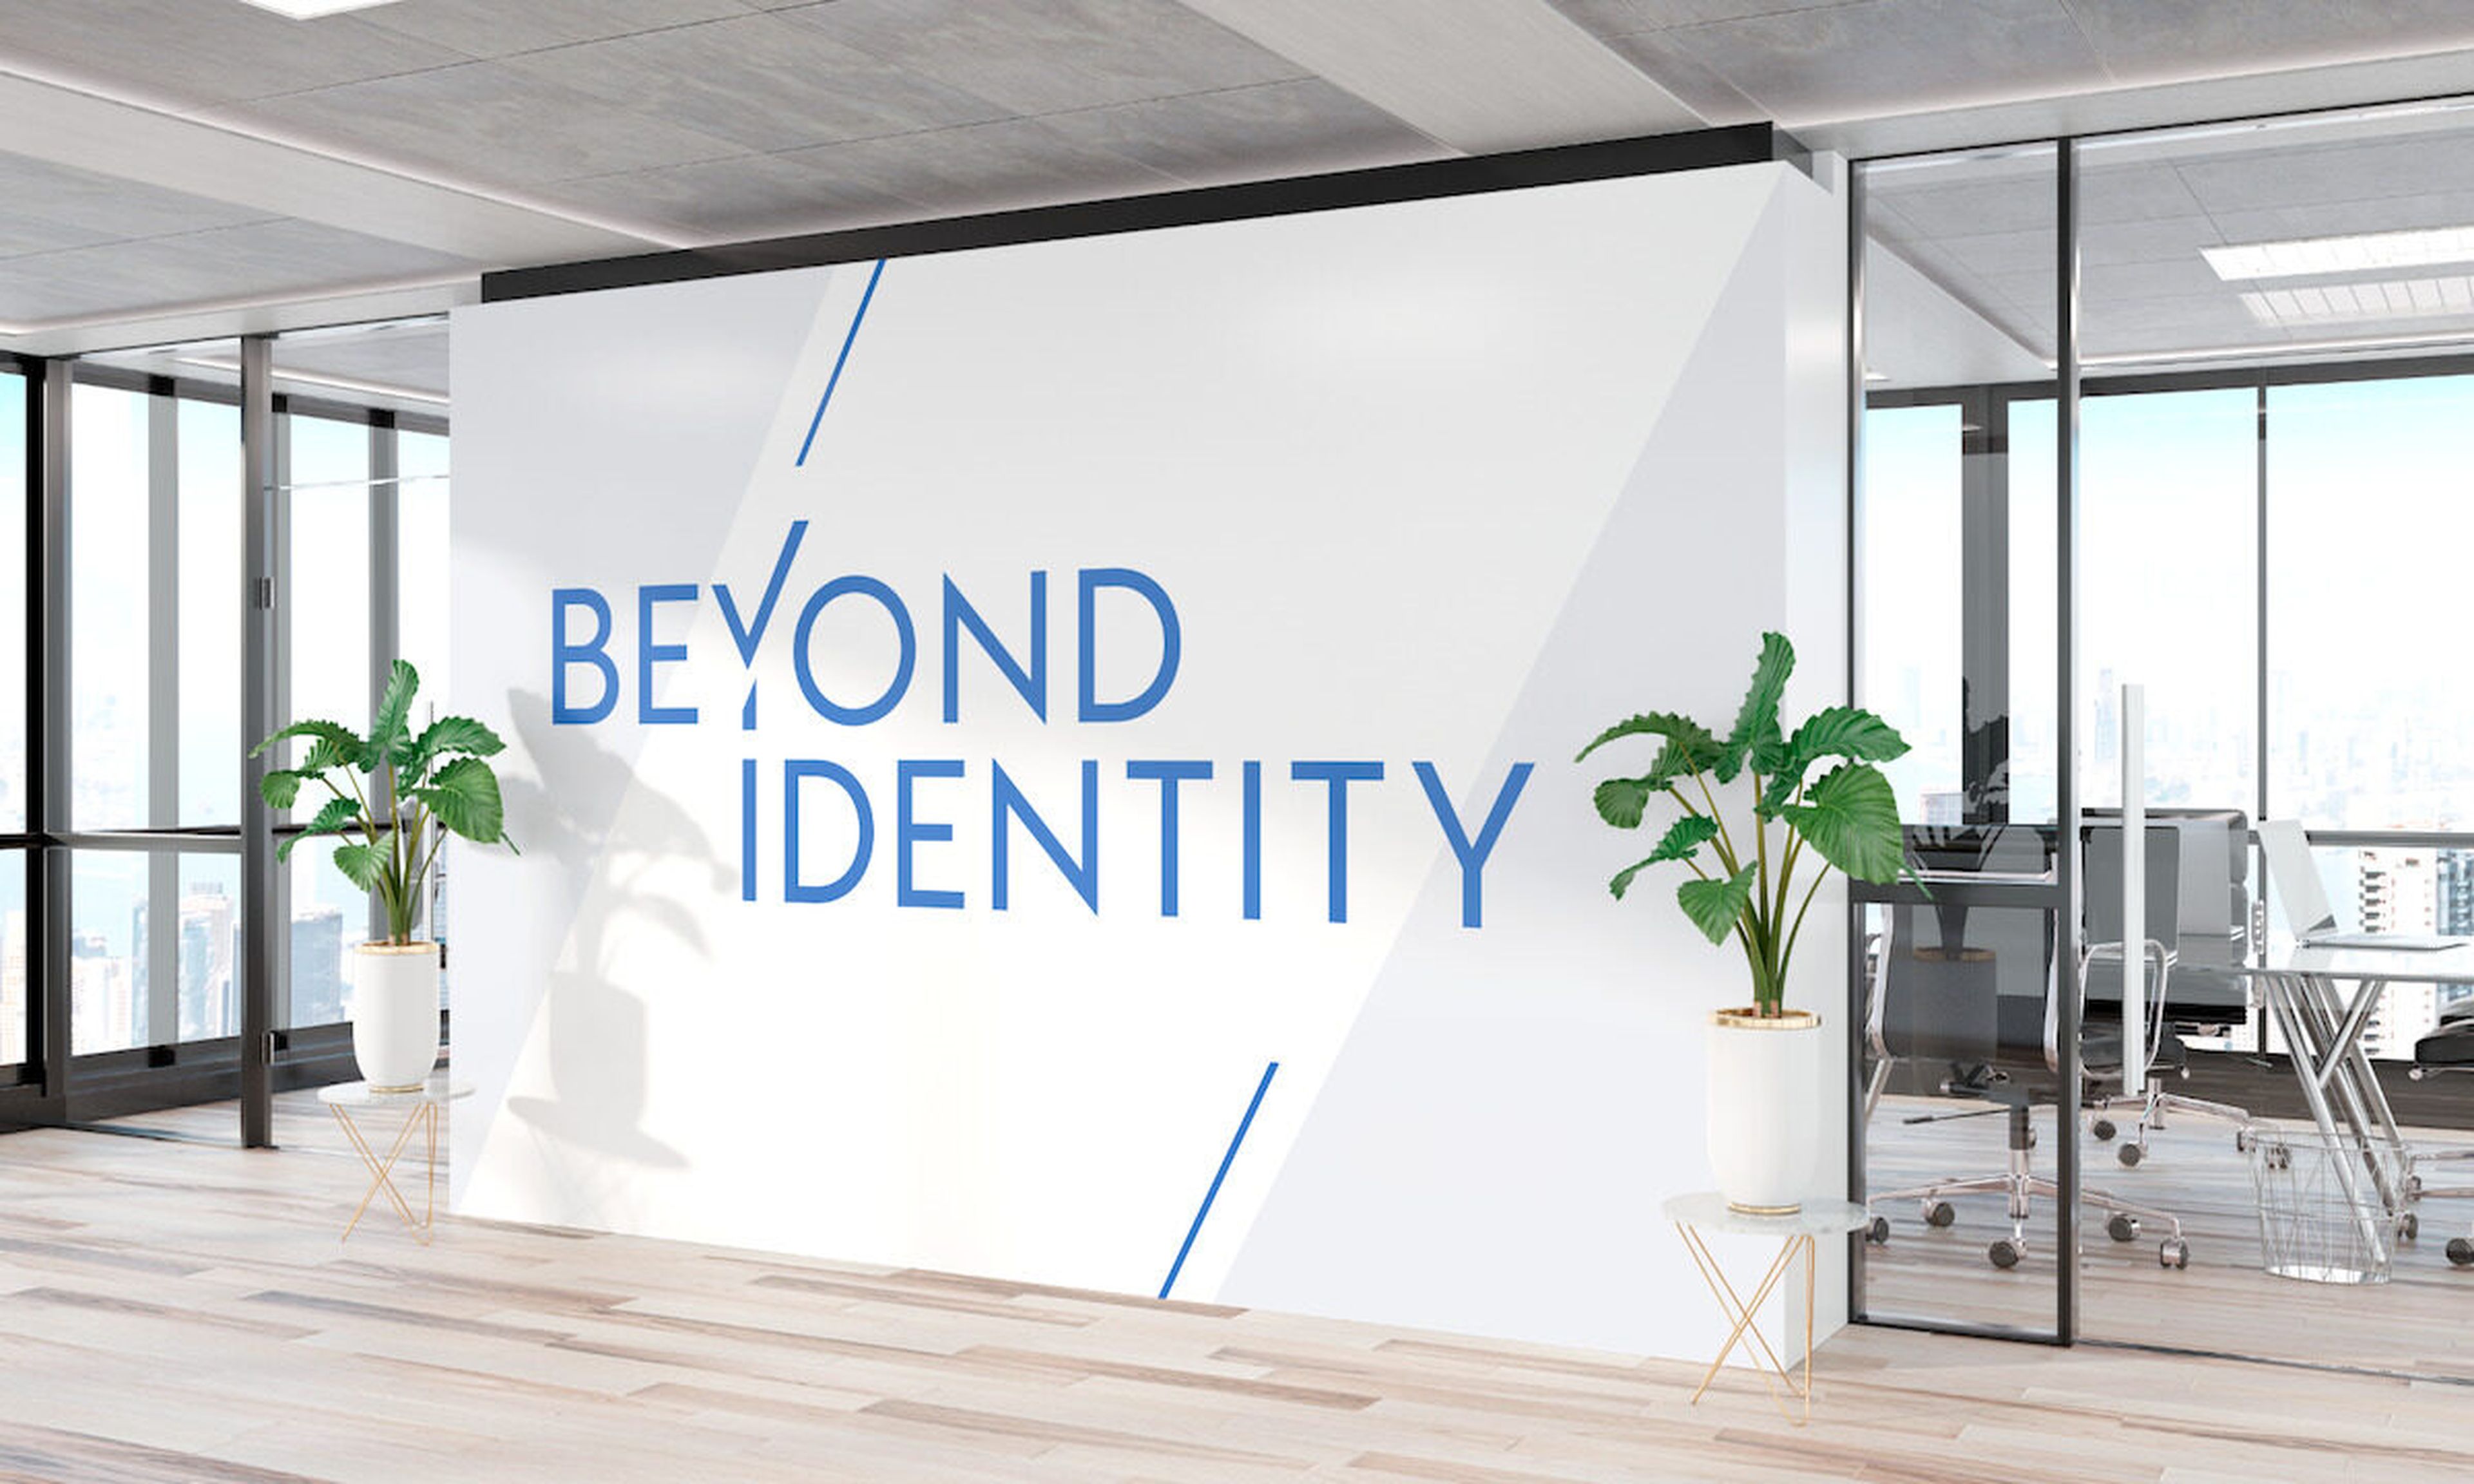 Beyond Identity was one of two companies that topped $1 billion in valuation today. The other was  managed detection and response company eSentire. (Credit: Beyond Identity)